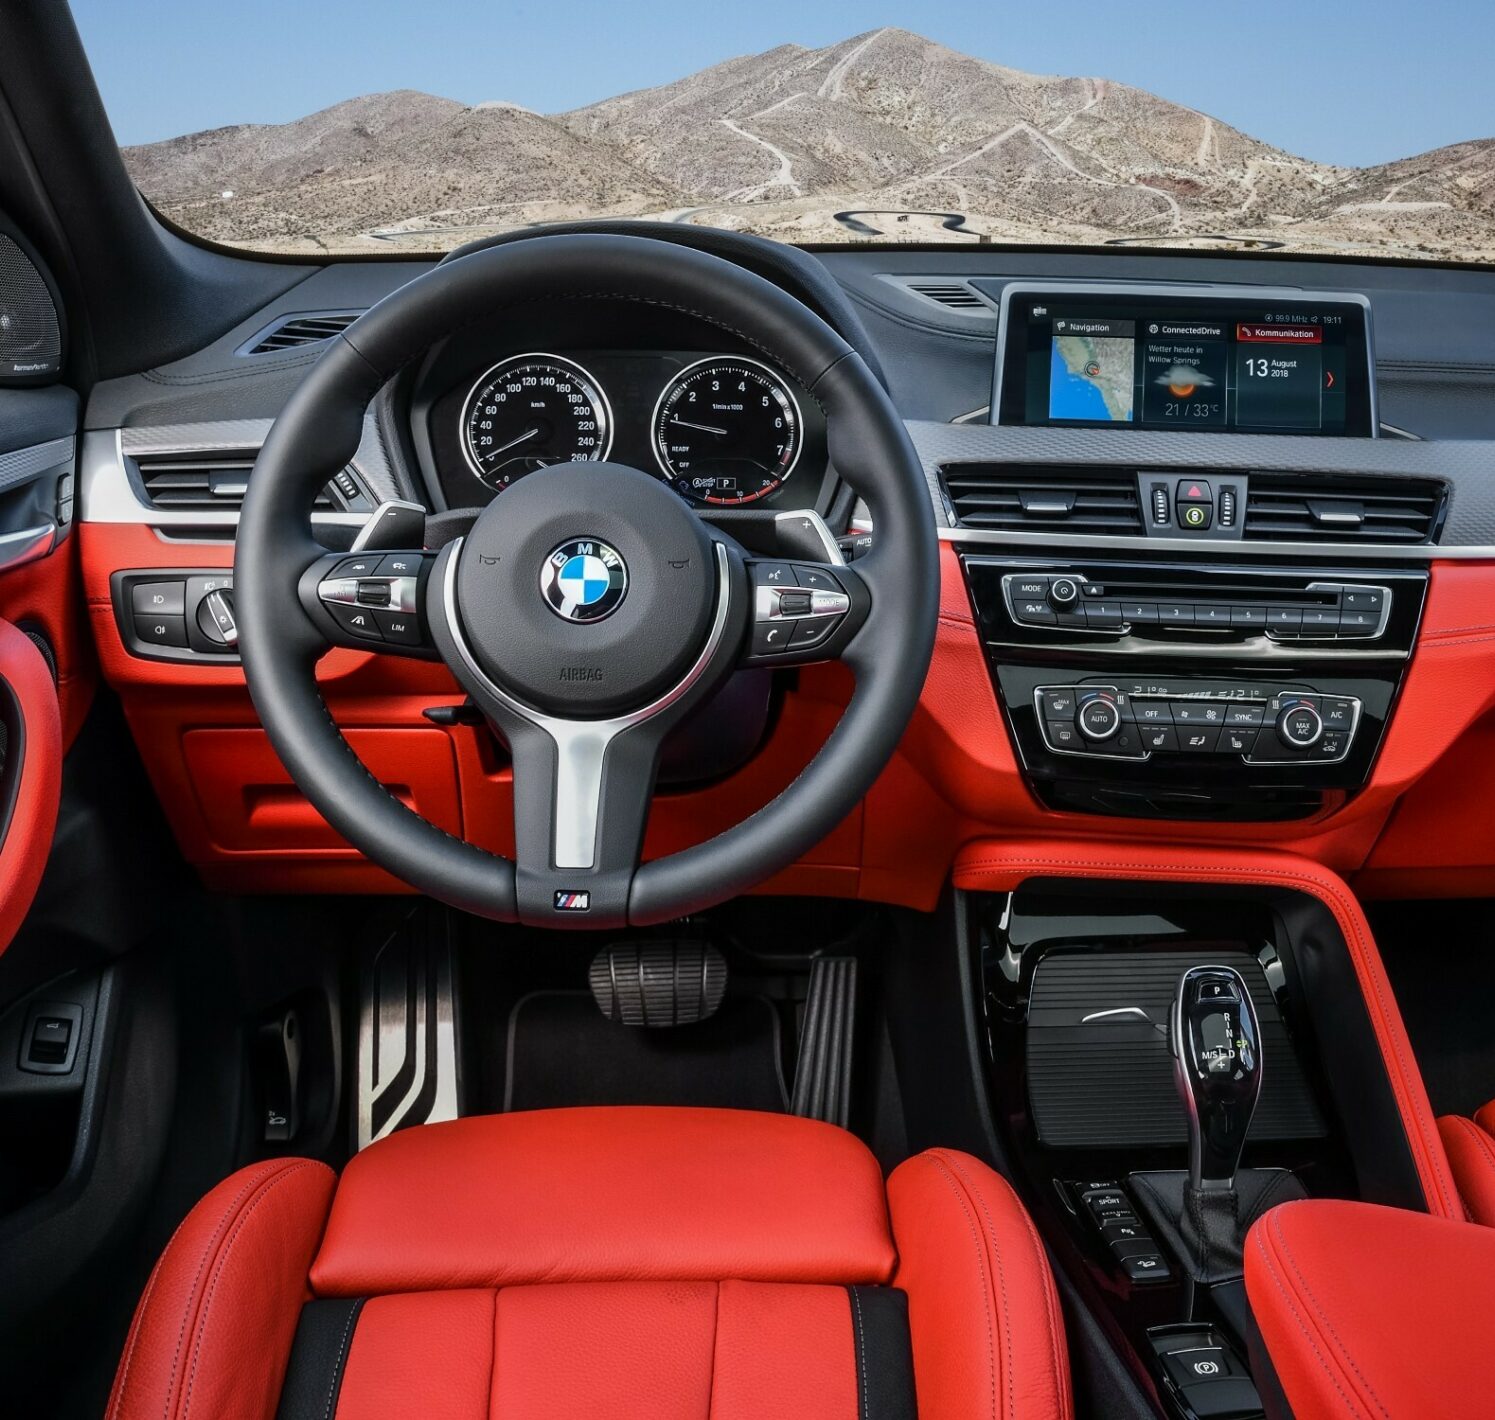 https://autofilter.sk/assets/images/x1/gallery/P90320387_lowRes_the-new-bmw-x2-m35i.jpg - obrazok